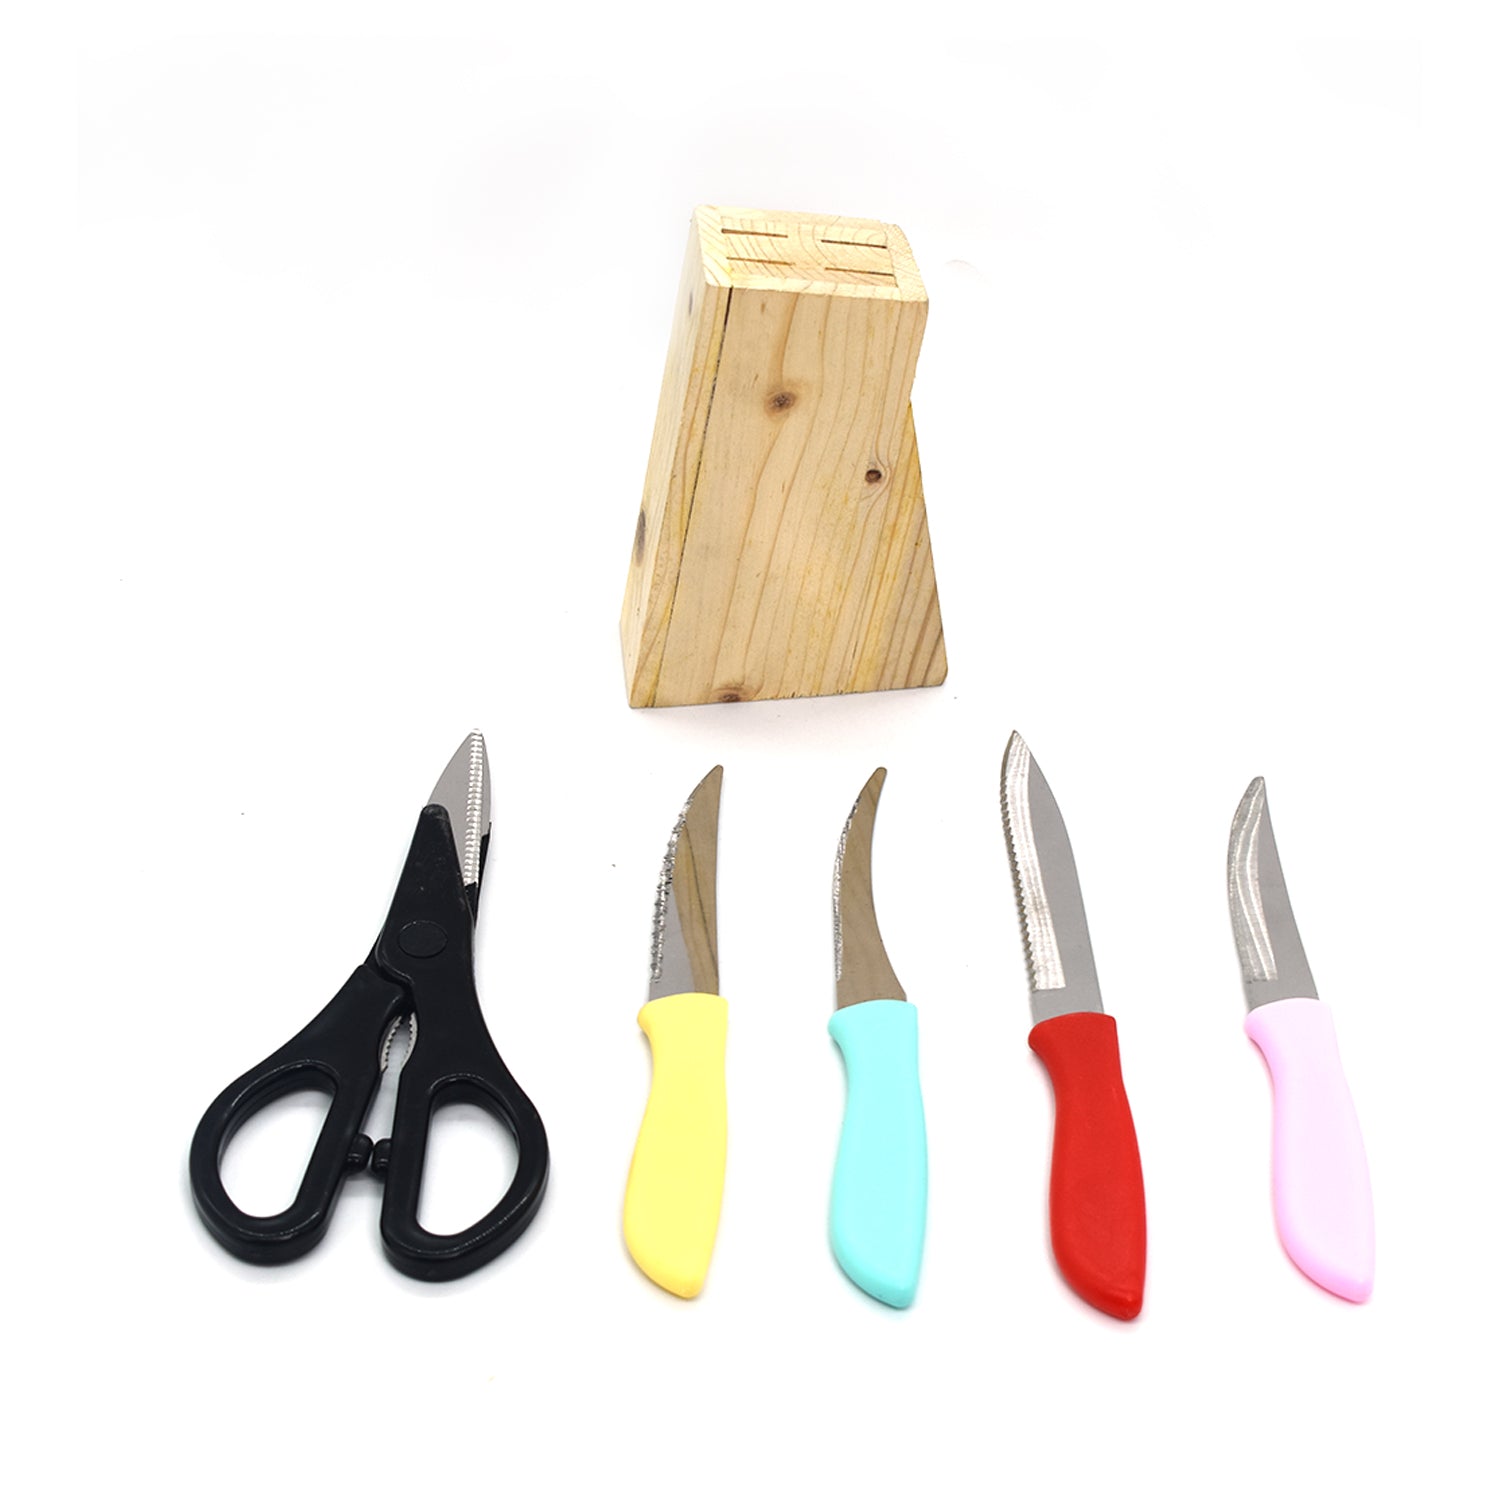 2799 Stainless Steel Kitchen 5-Pcs Knife Set with Wooden Stand for Vegetable & Meat Cutting Scissor (Knife Set) 